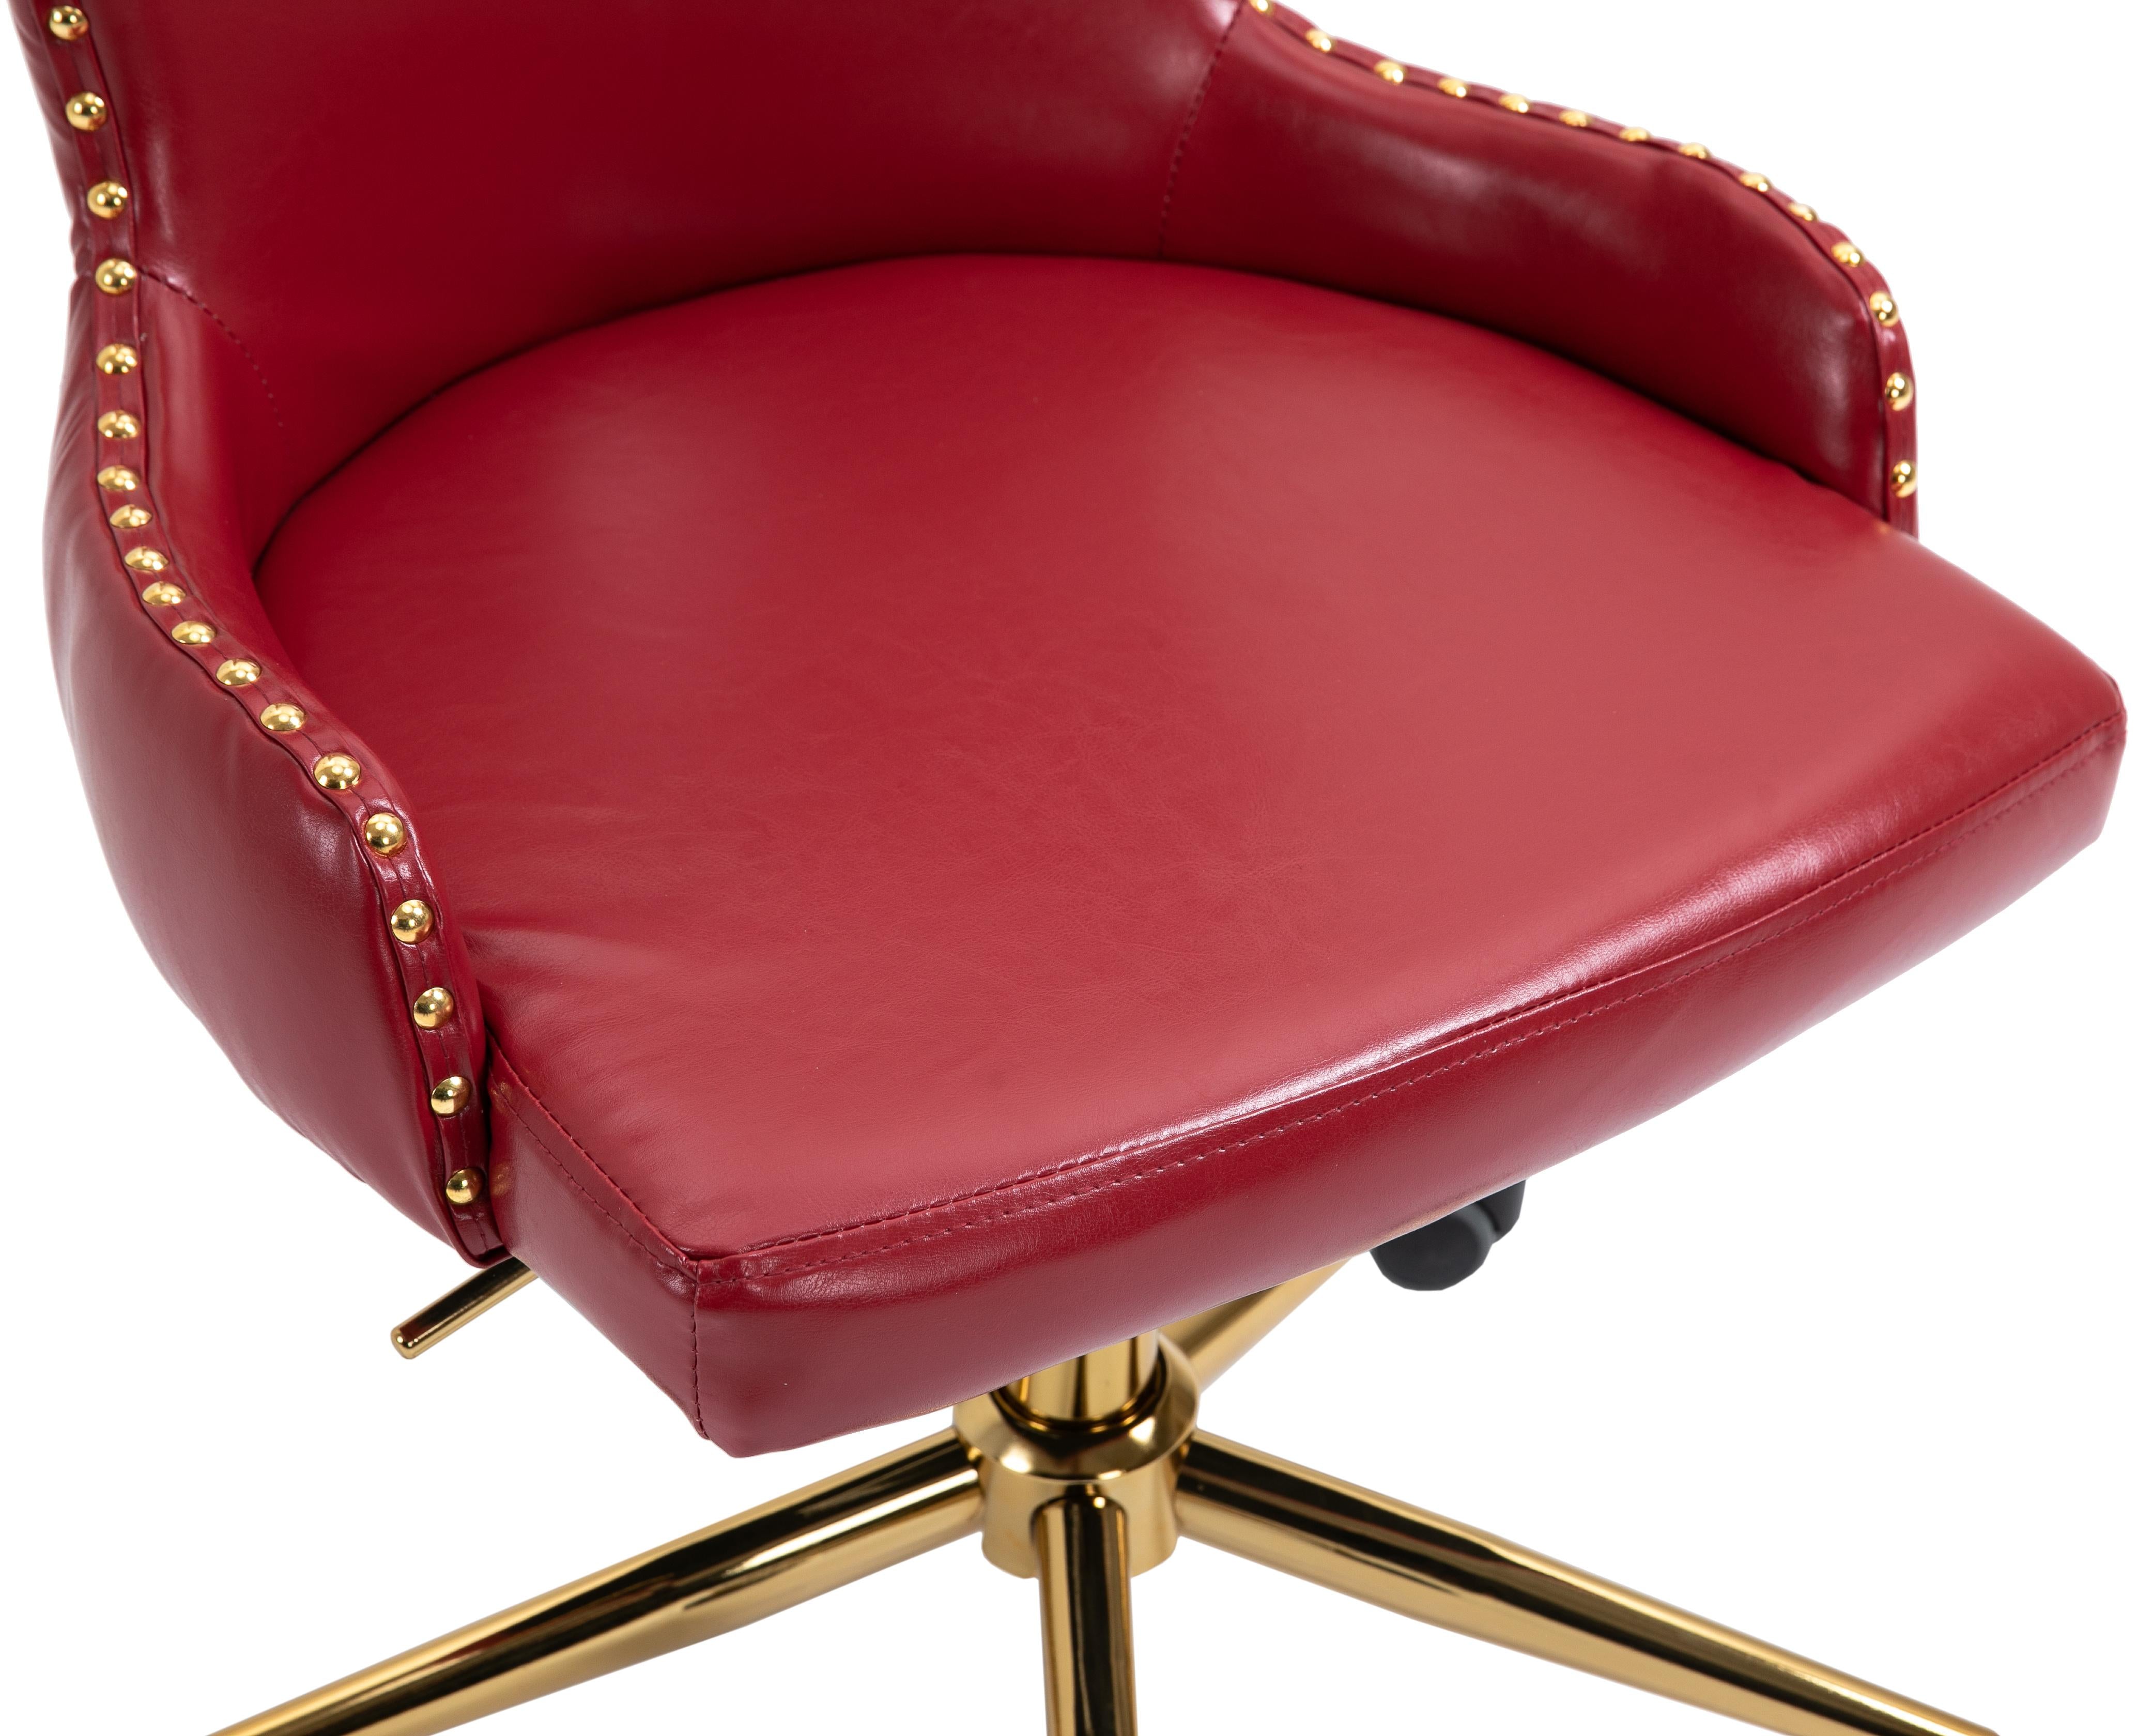 Hendrix Red Faux Leather Office Chair - Luxury Home Furniture (MI)